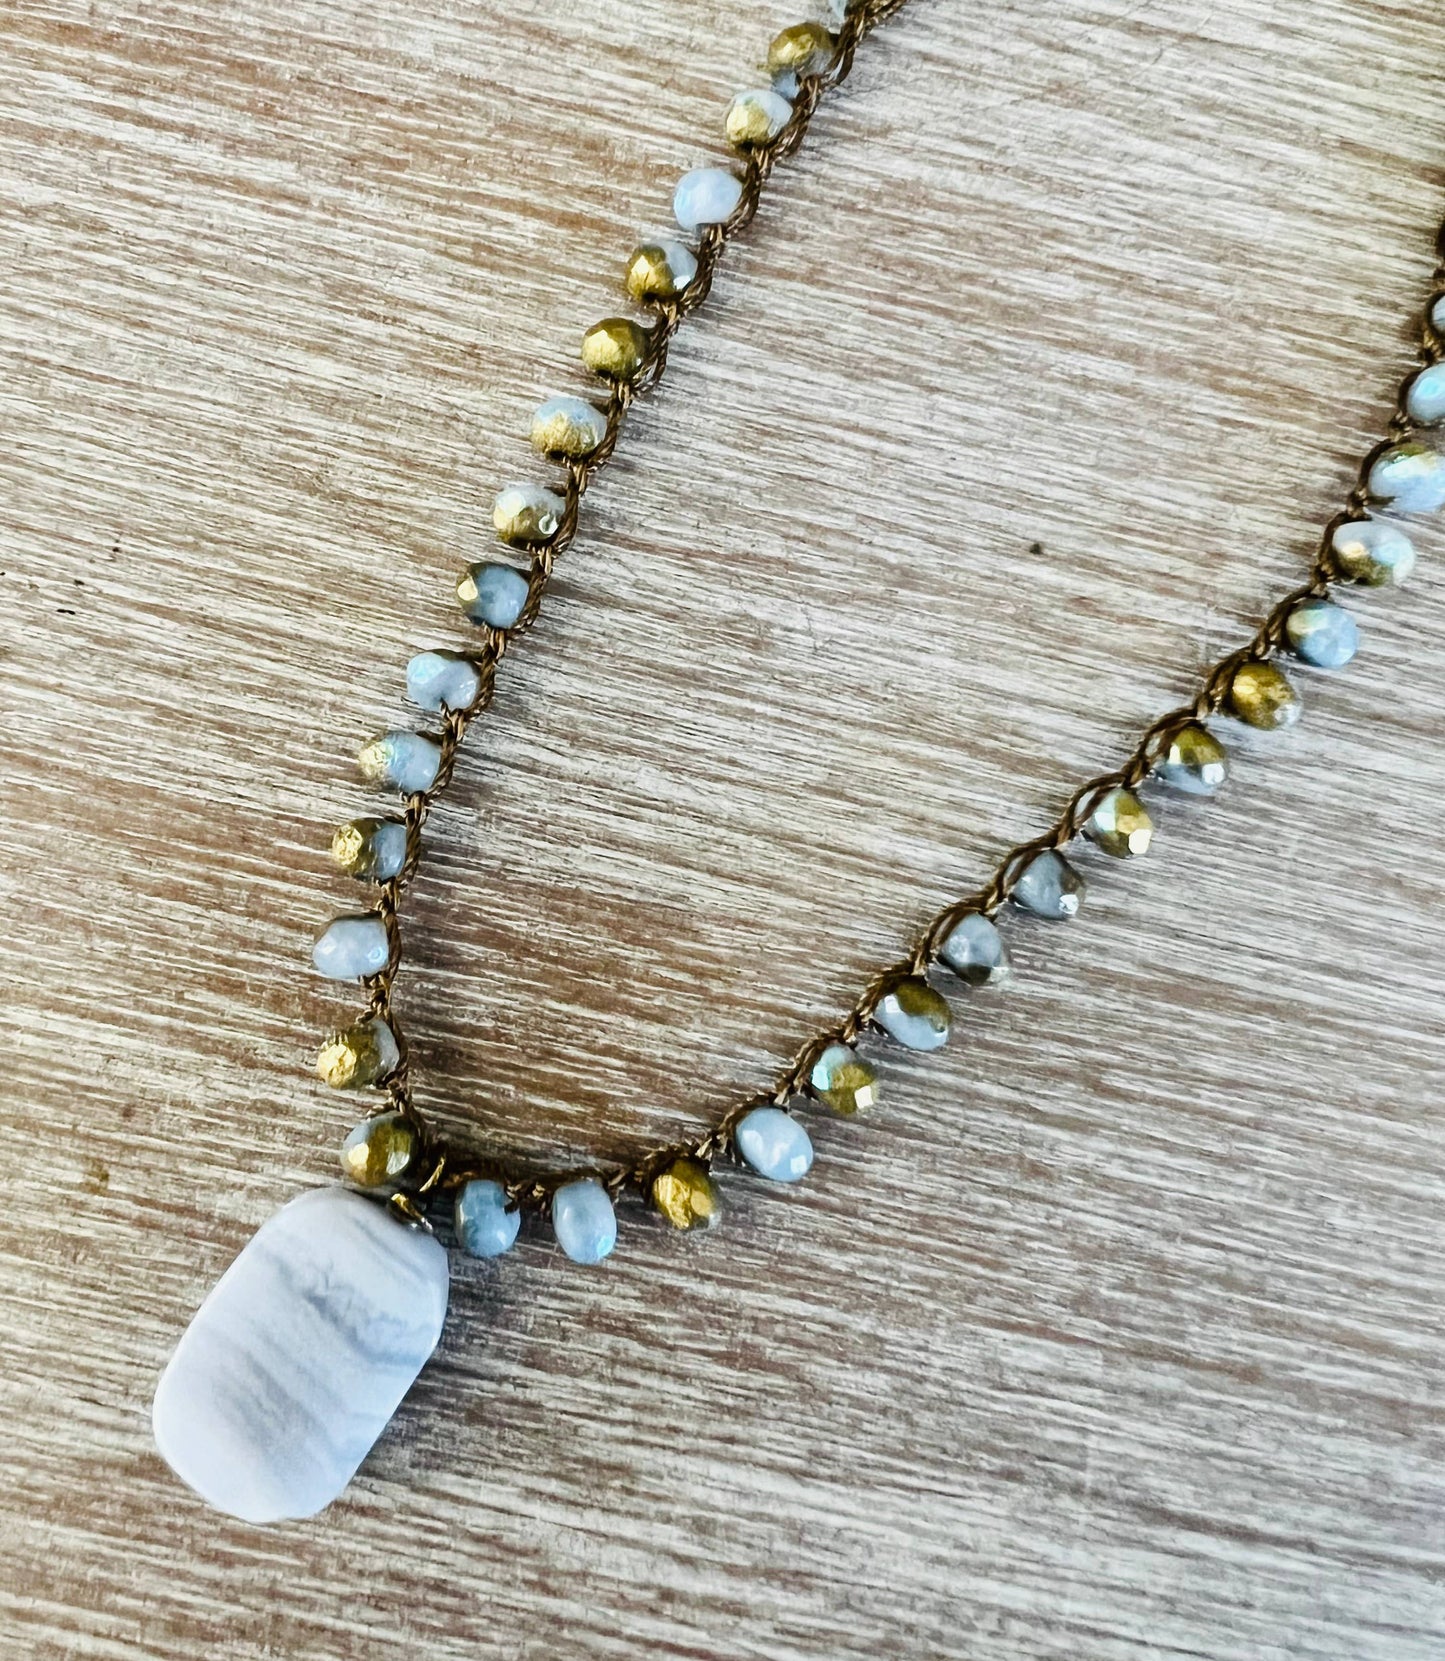 Blue Lace Agate Natural Stone Necklace With Autumn Gold